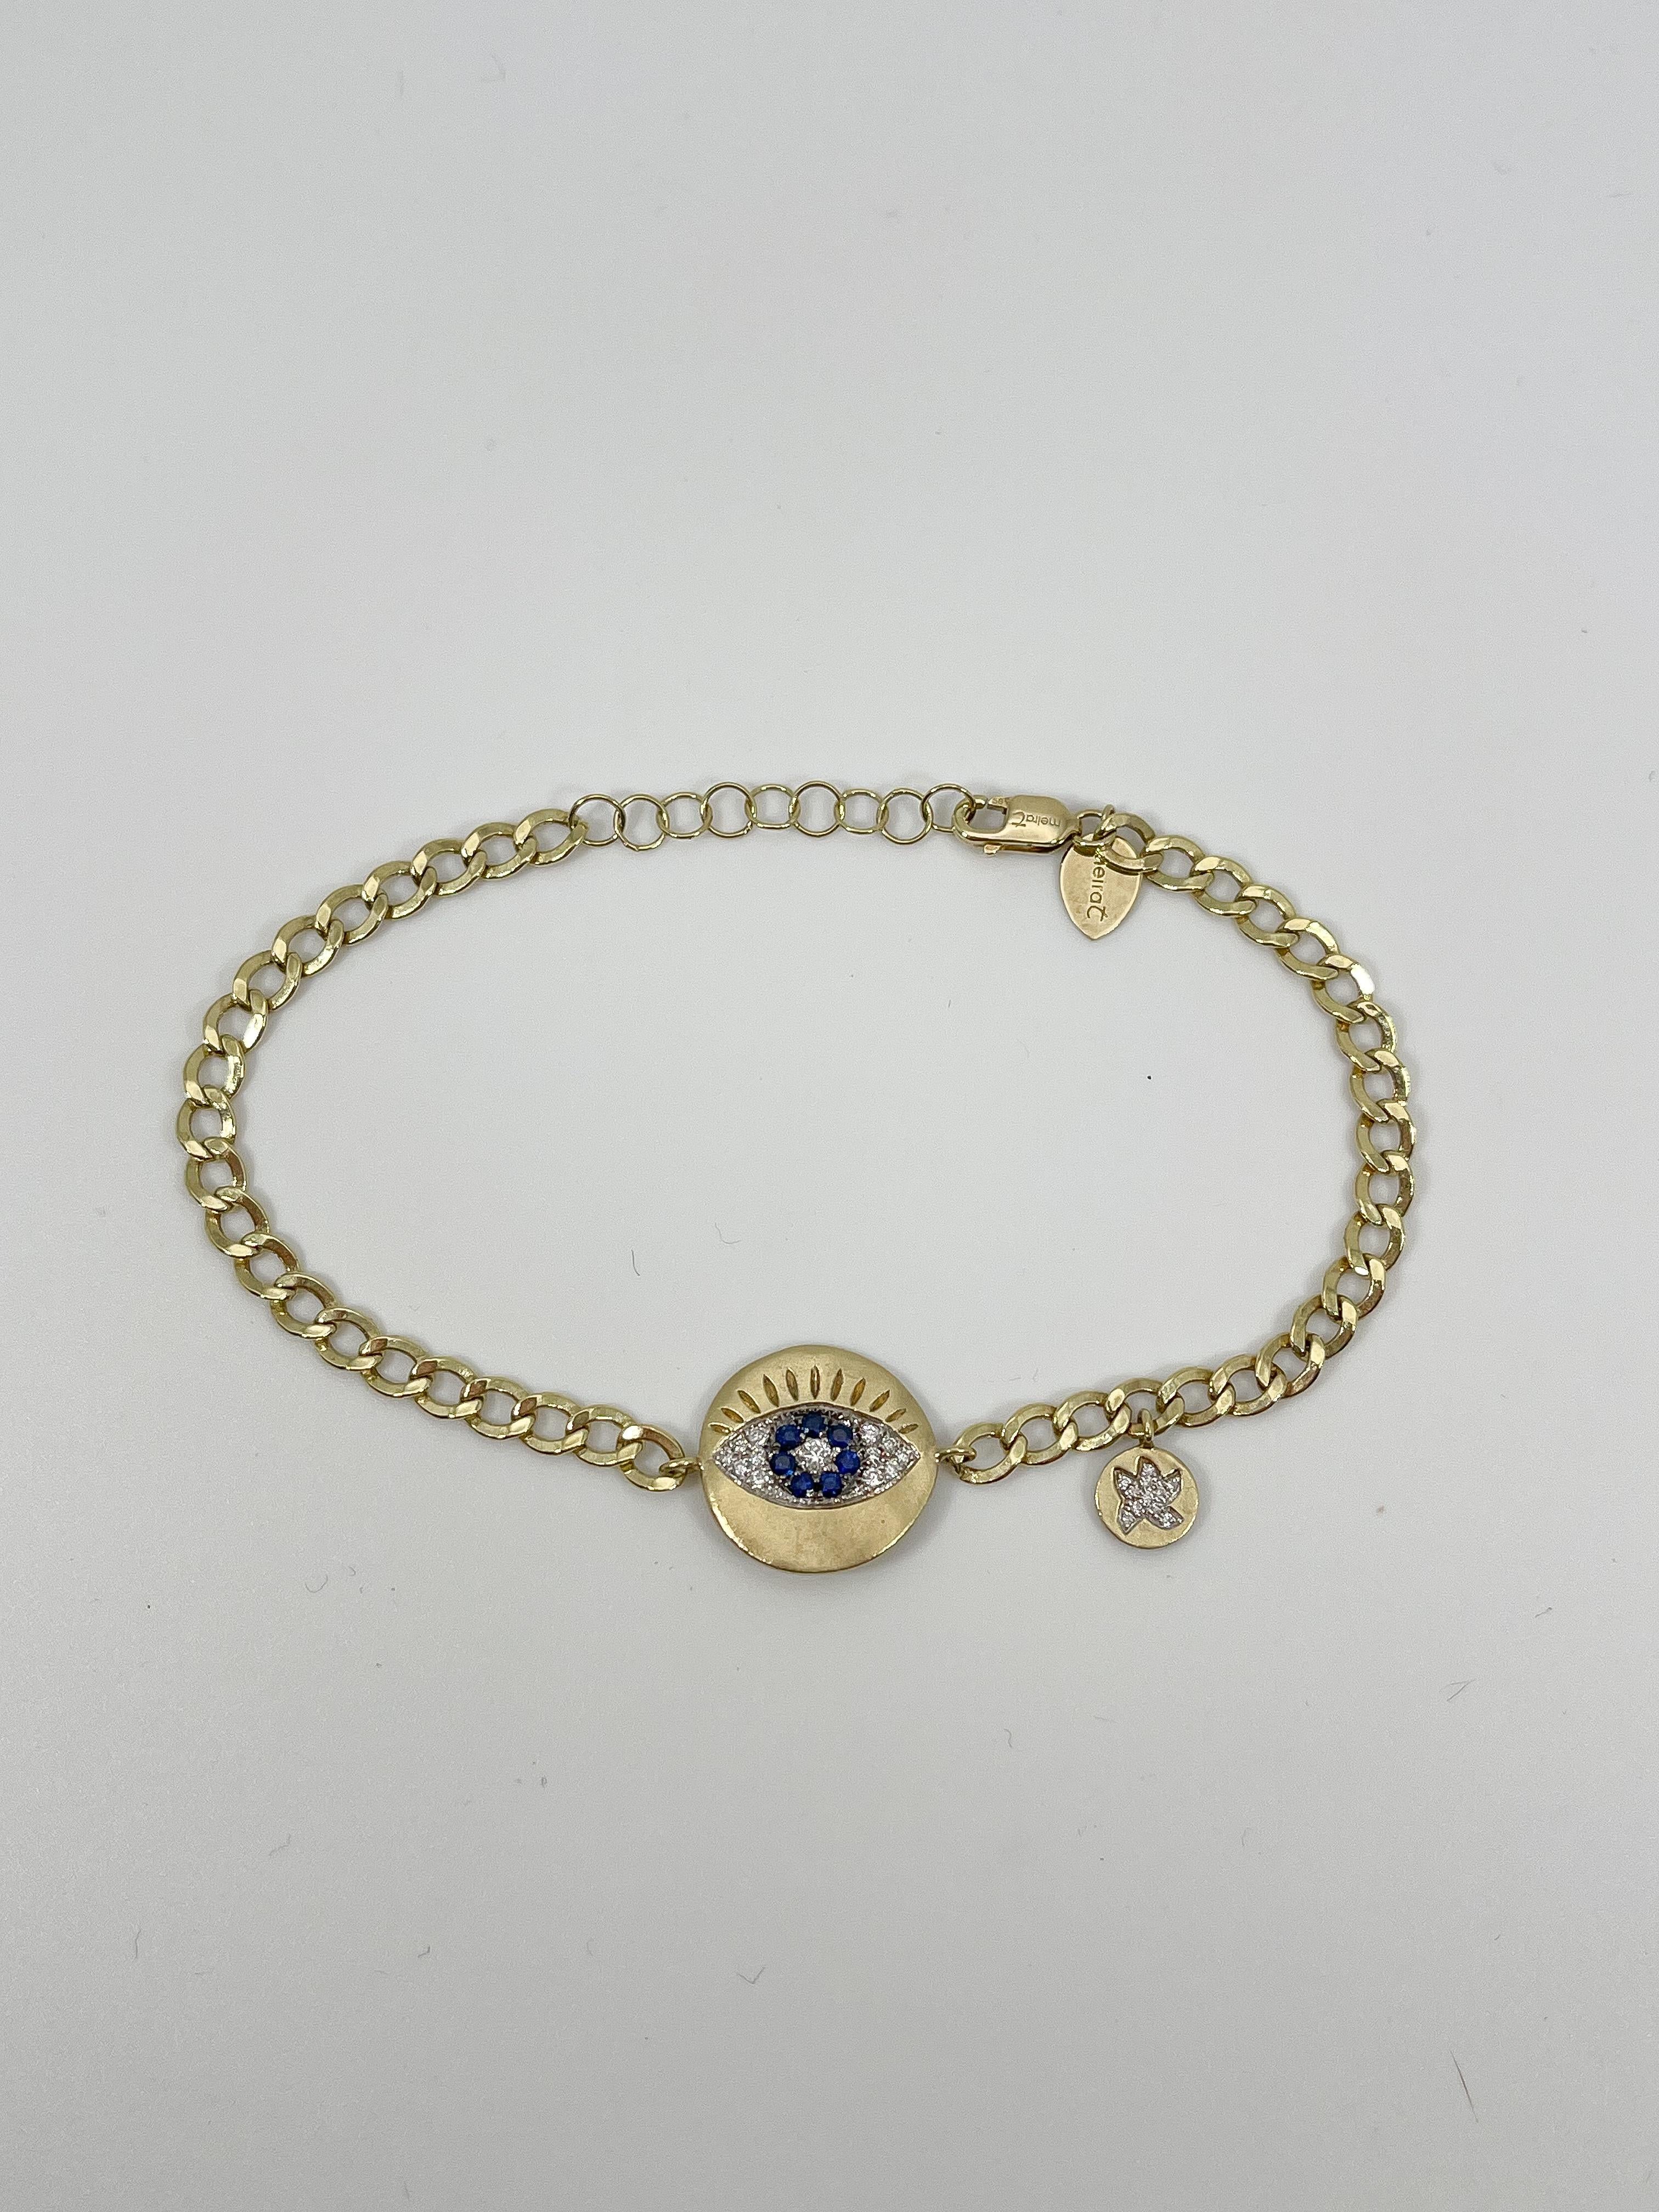 14k yellow gold diamond and sapphire evil eye bracelet. All stones in this bracelet are round, the evil eye measures to be 13.5mm in diameter, bracelet has a stationed charm with diamonds to the side of the evil eye, the bracelet measures to be 7